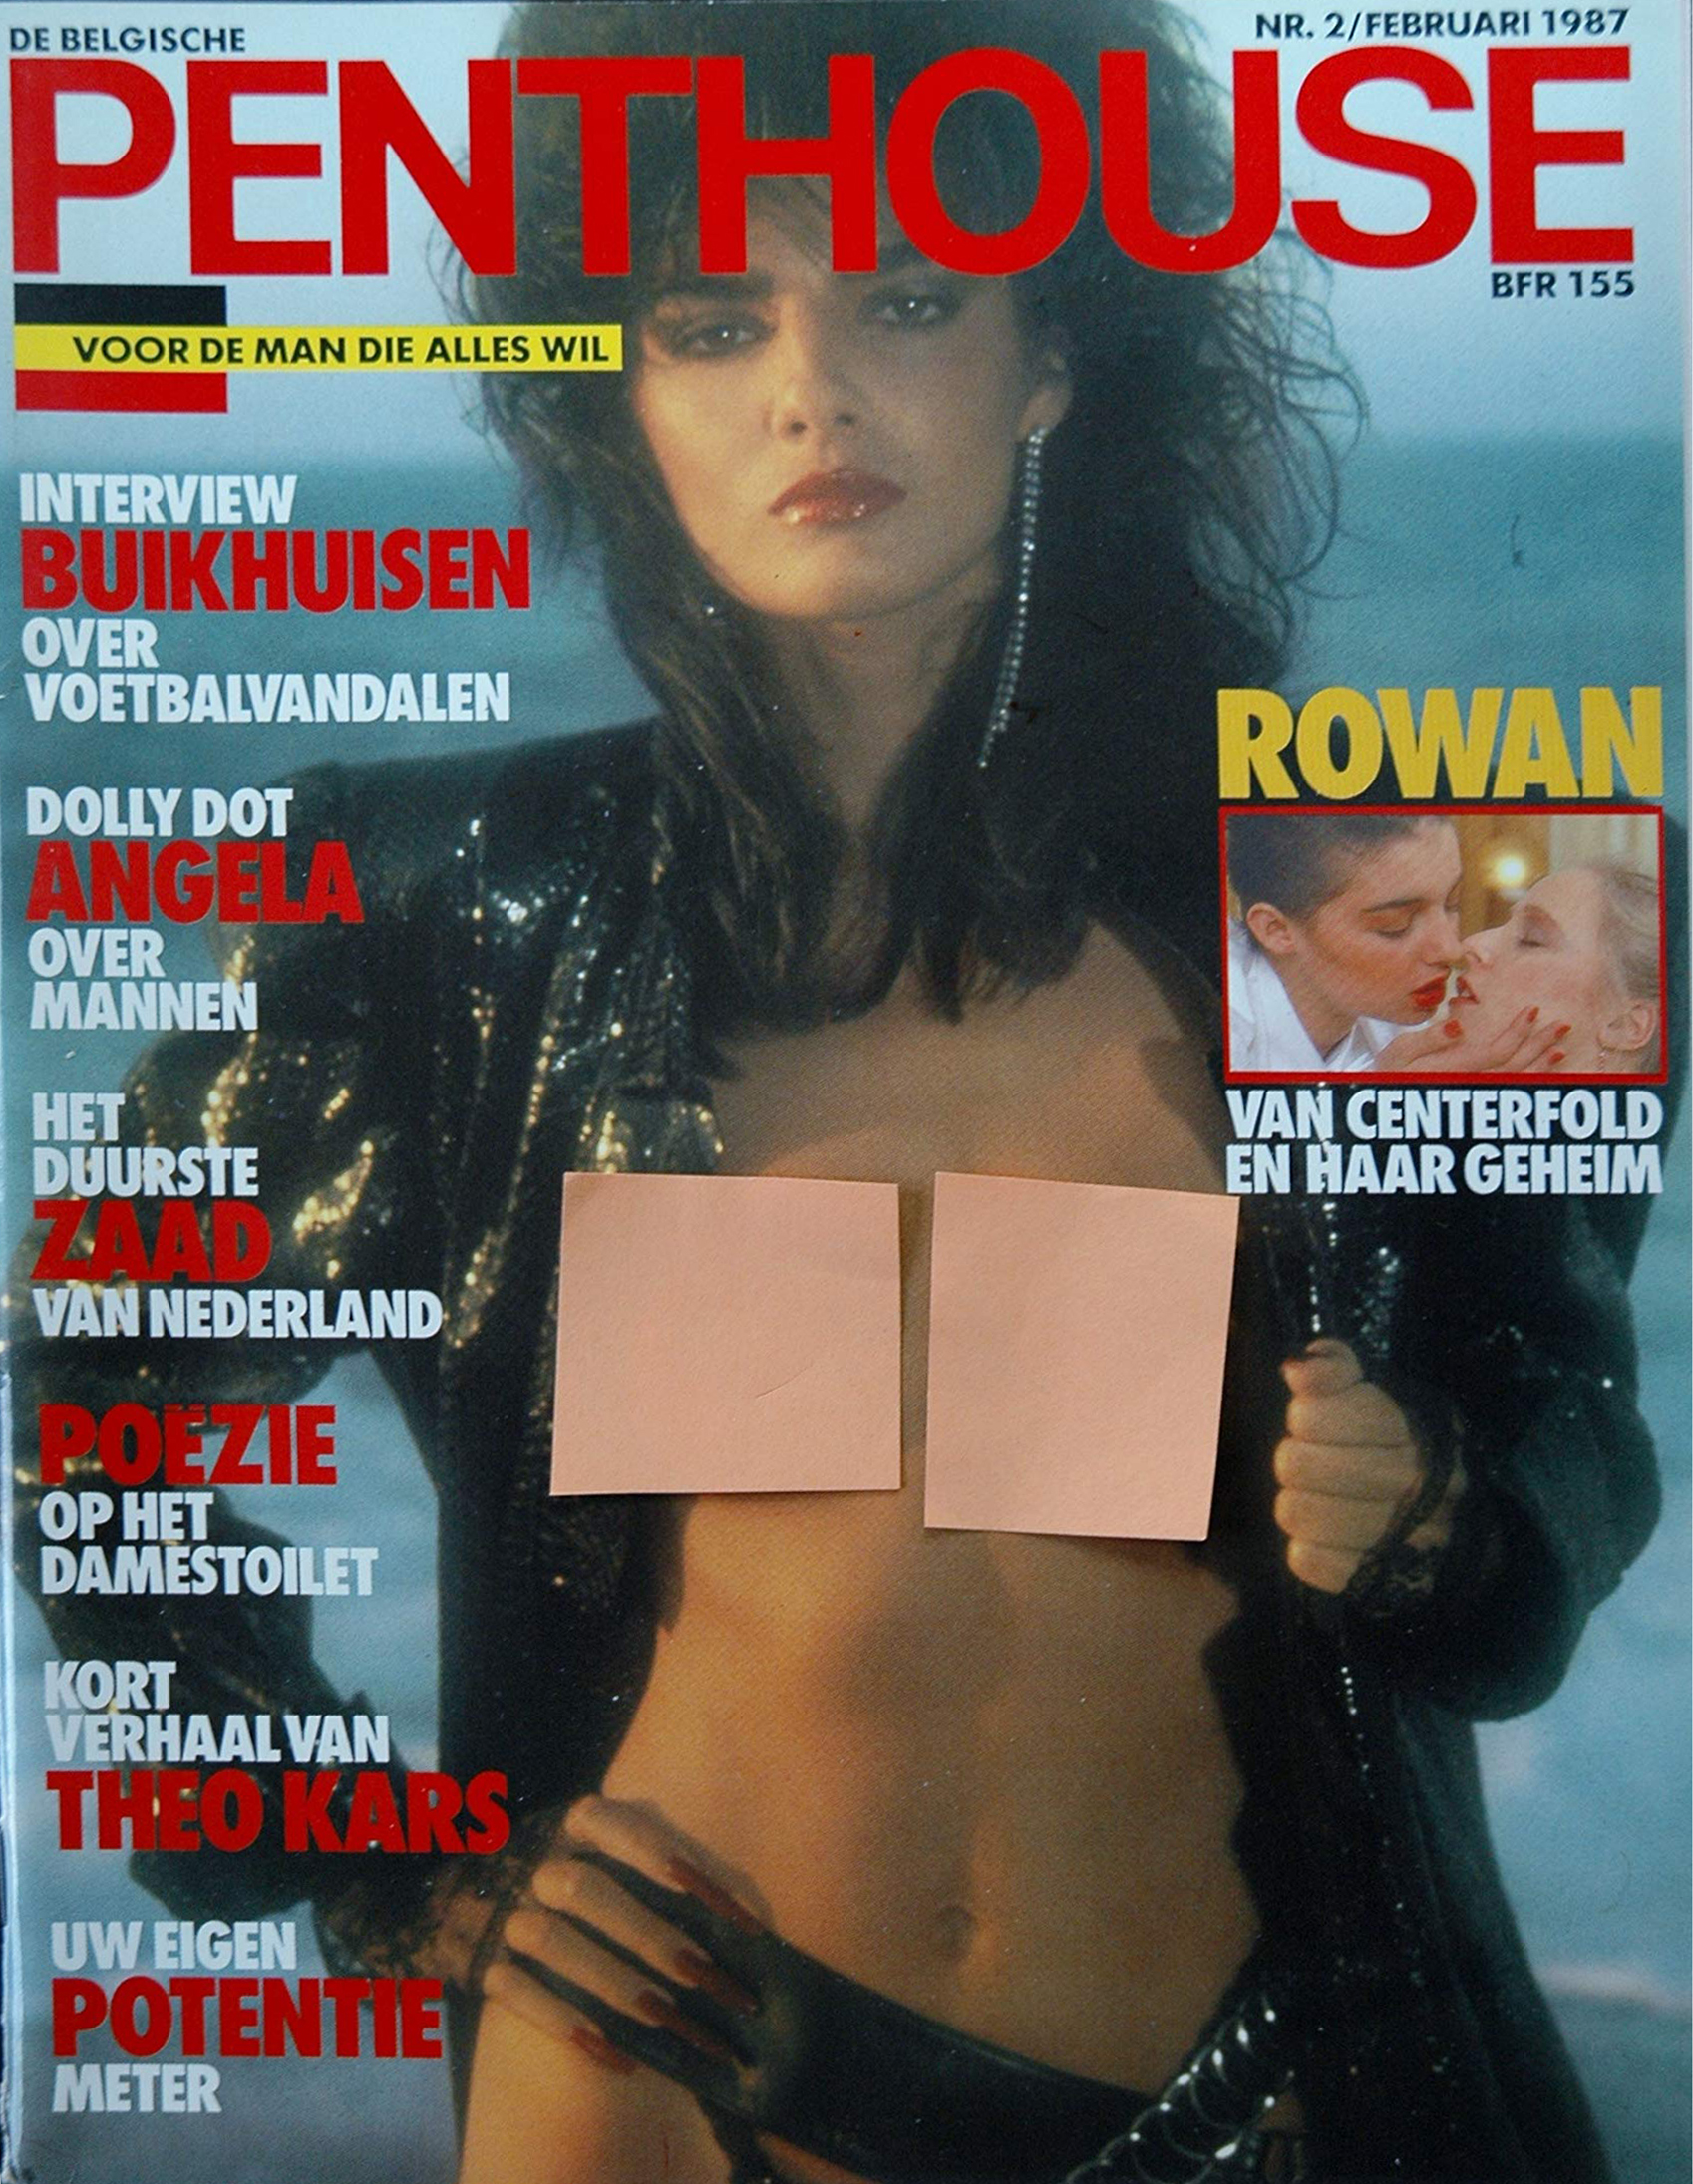 Penthouse (Germany) February 1987 magazine back issue Penthouse (Germany) magizine back copy Penthouse (Germany) February 1987 Magazine Back Issue Published by Penthouse Publishing, Bob Guccione. Interview Buikhuisen Over Voetbalvandalen.